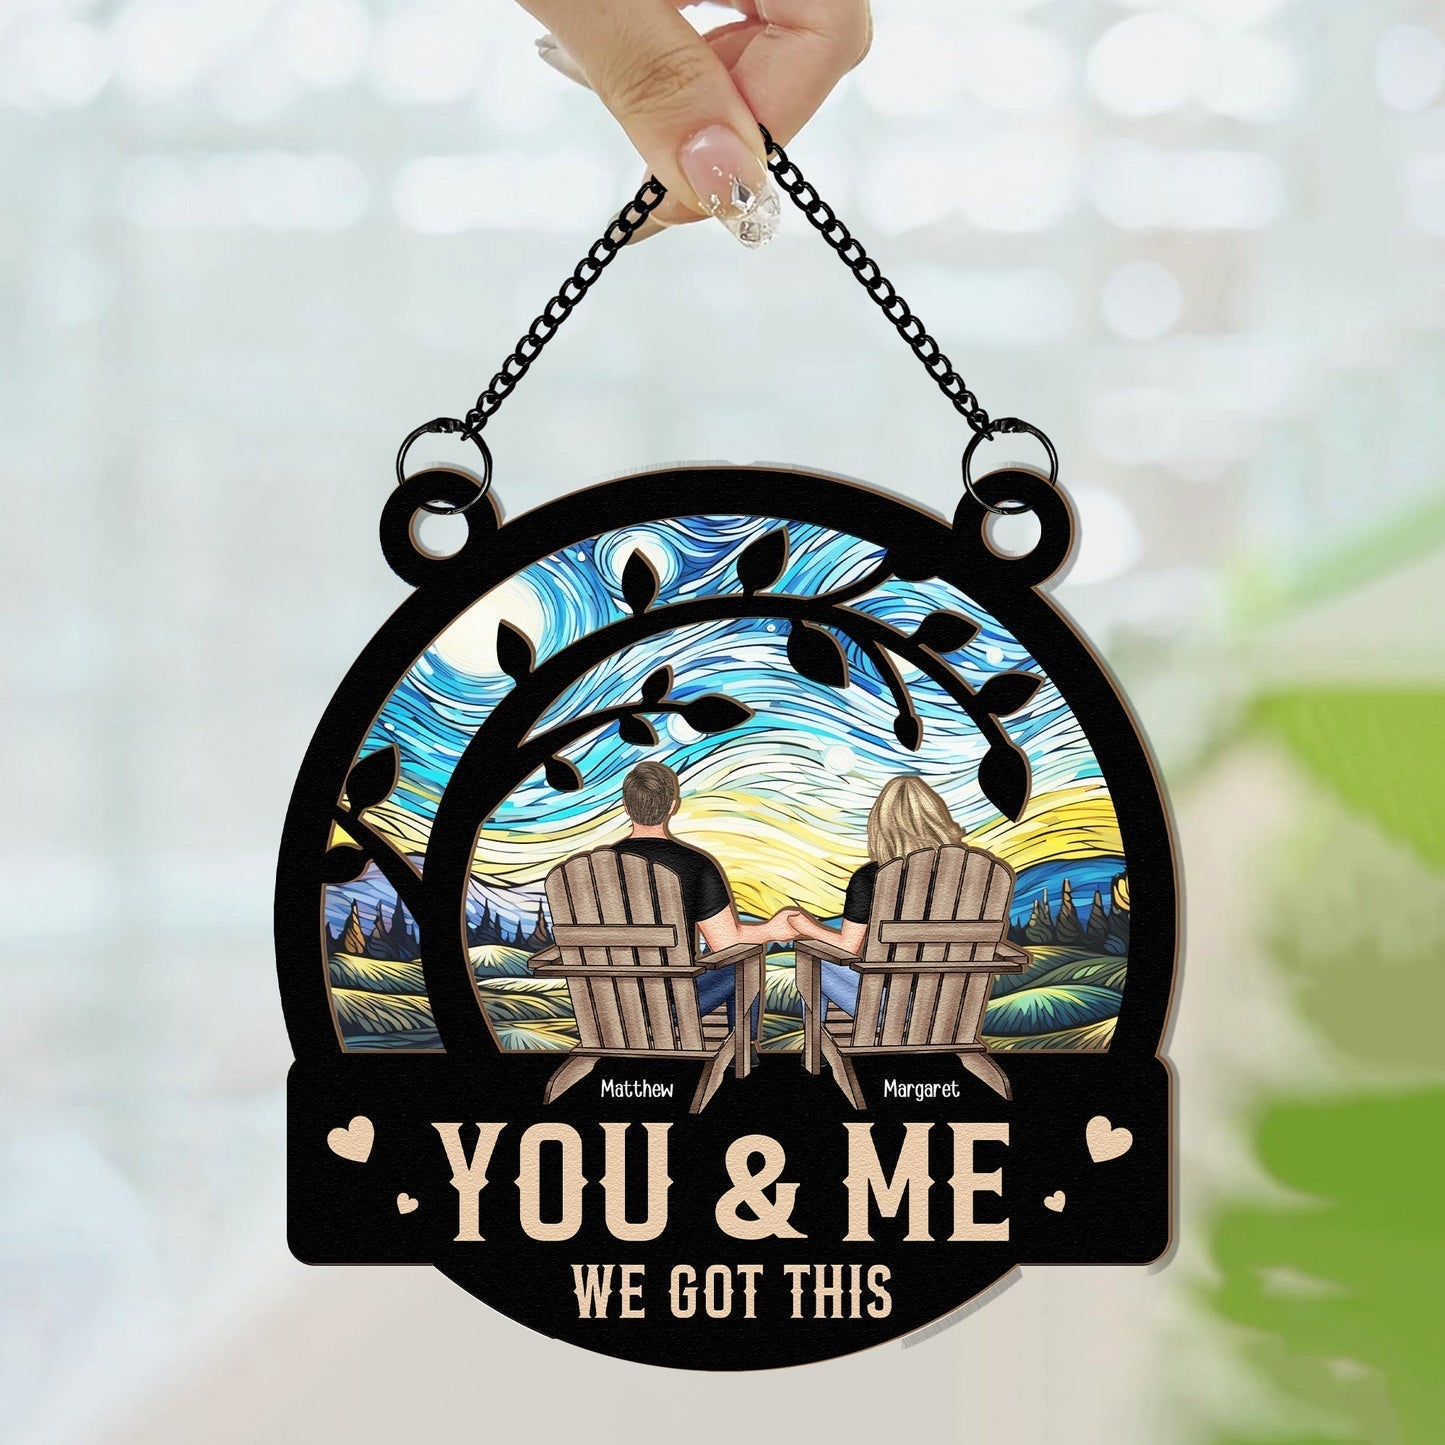 Personalized Window Hanging Suncatcher Ornament - You & Me We Got This - Anniversary Gifts